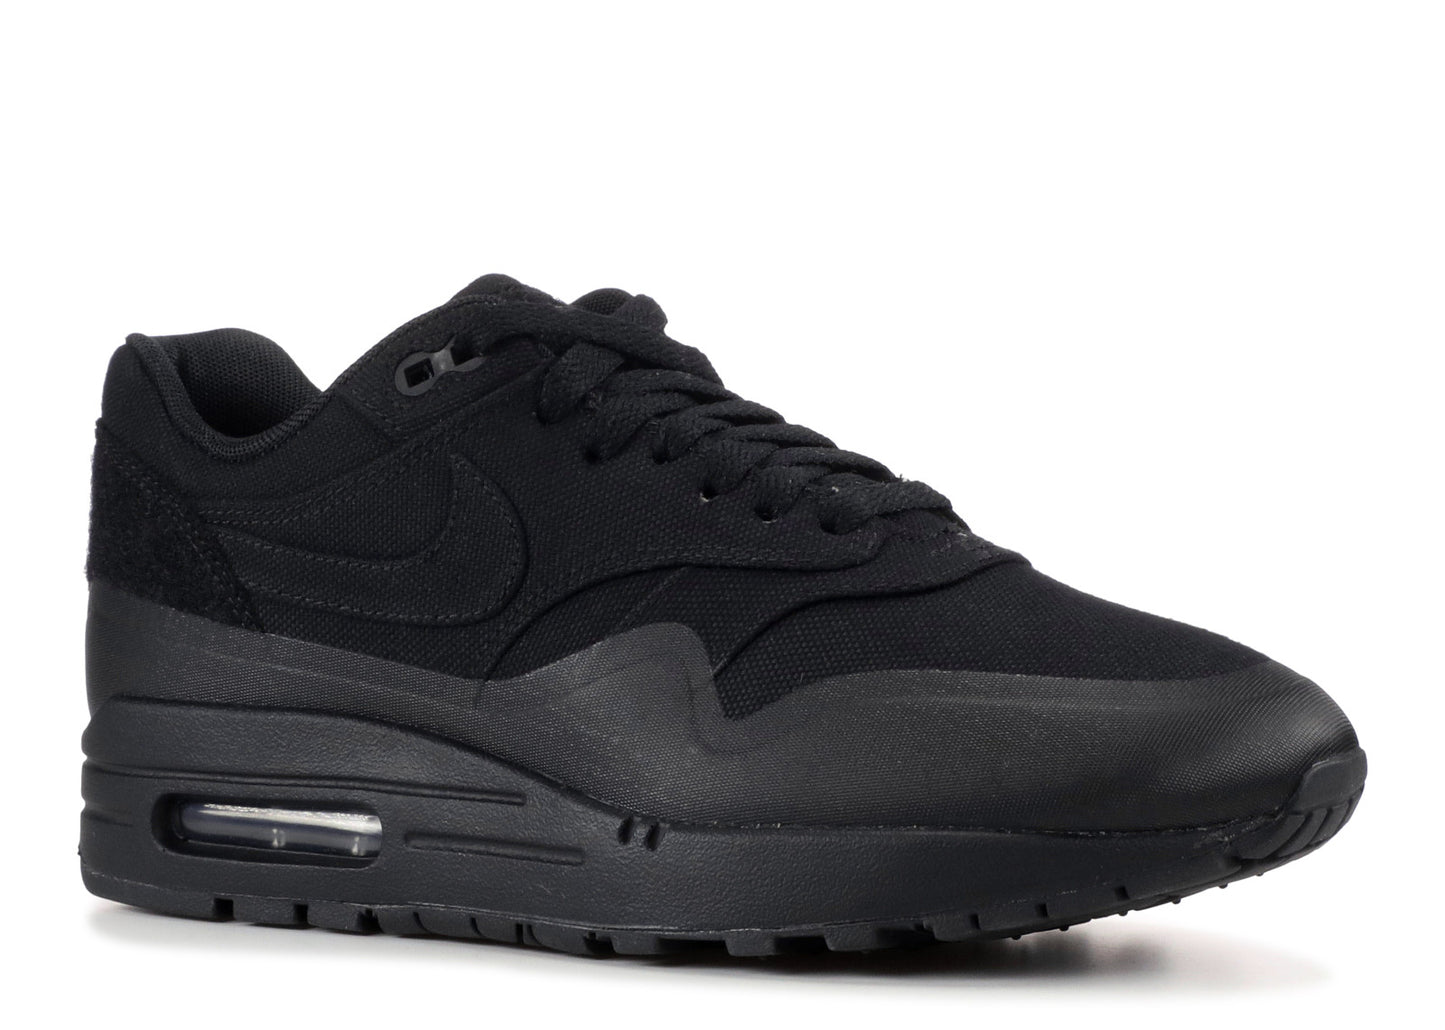 Nike Air Max 1 Velcro SP Patch "Black"